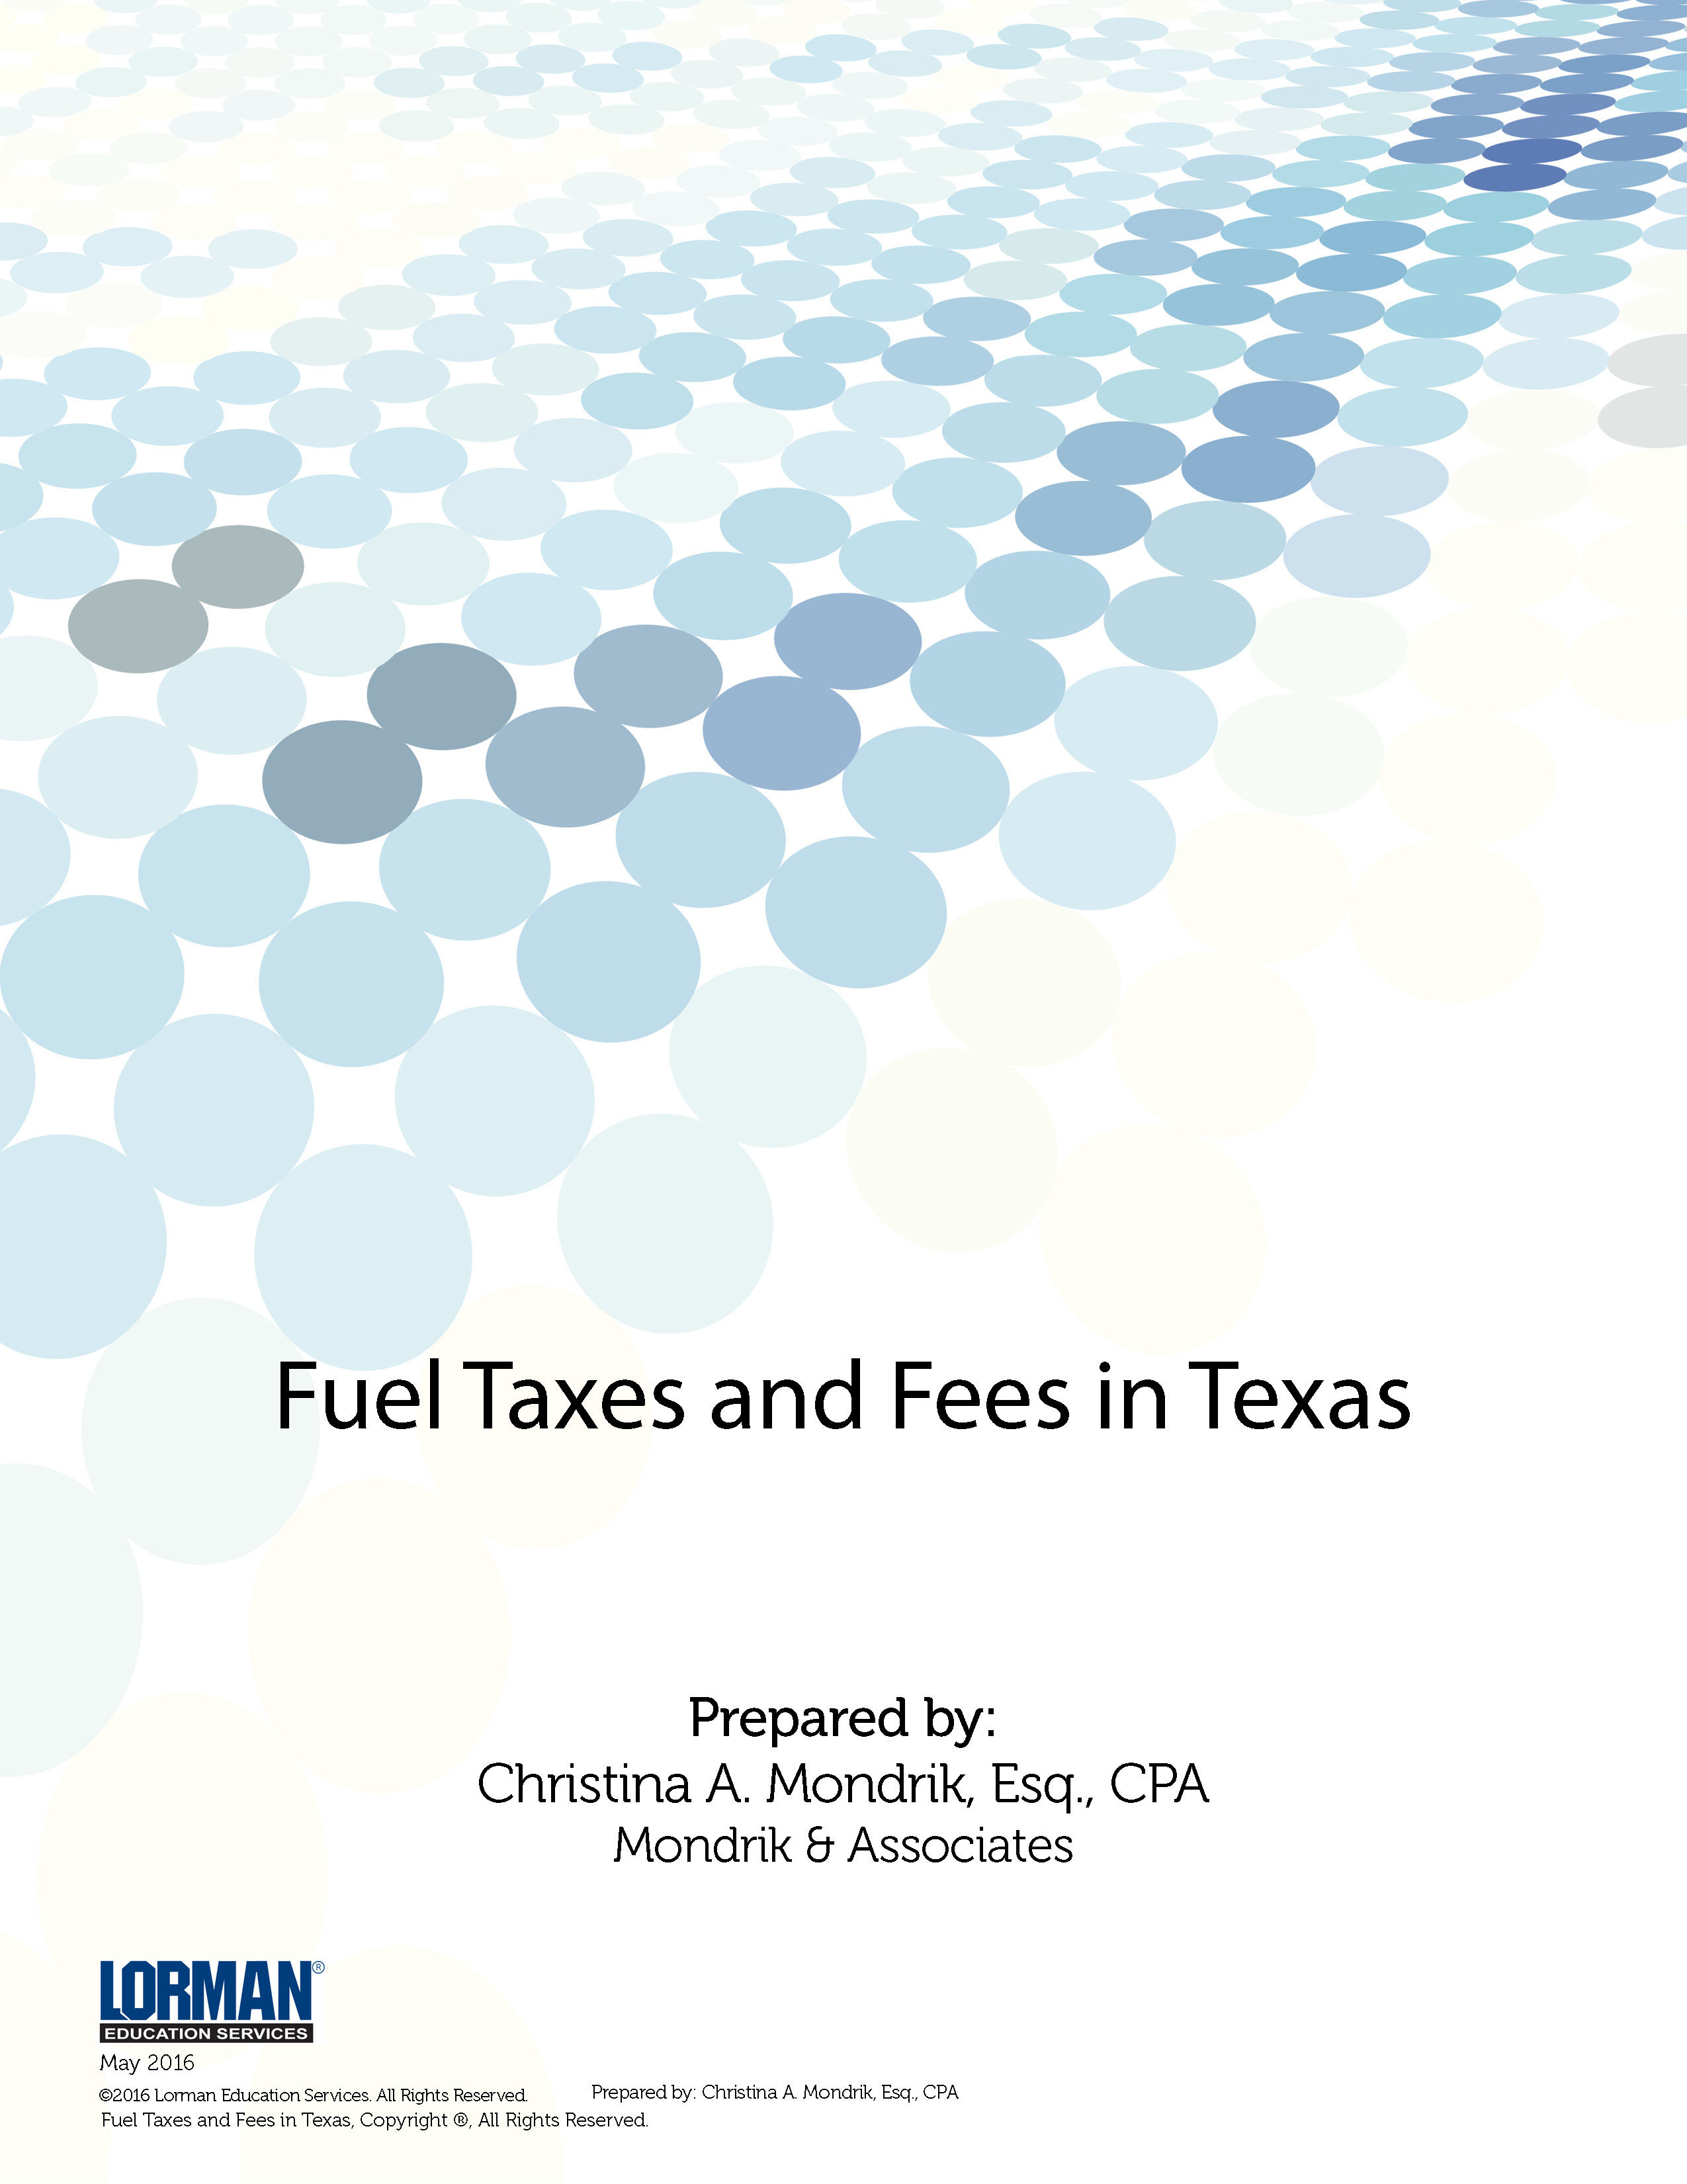 Fuel Taxes and Fees in Texas